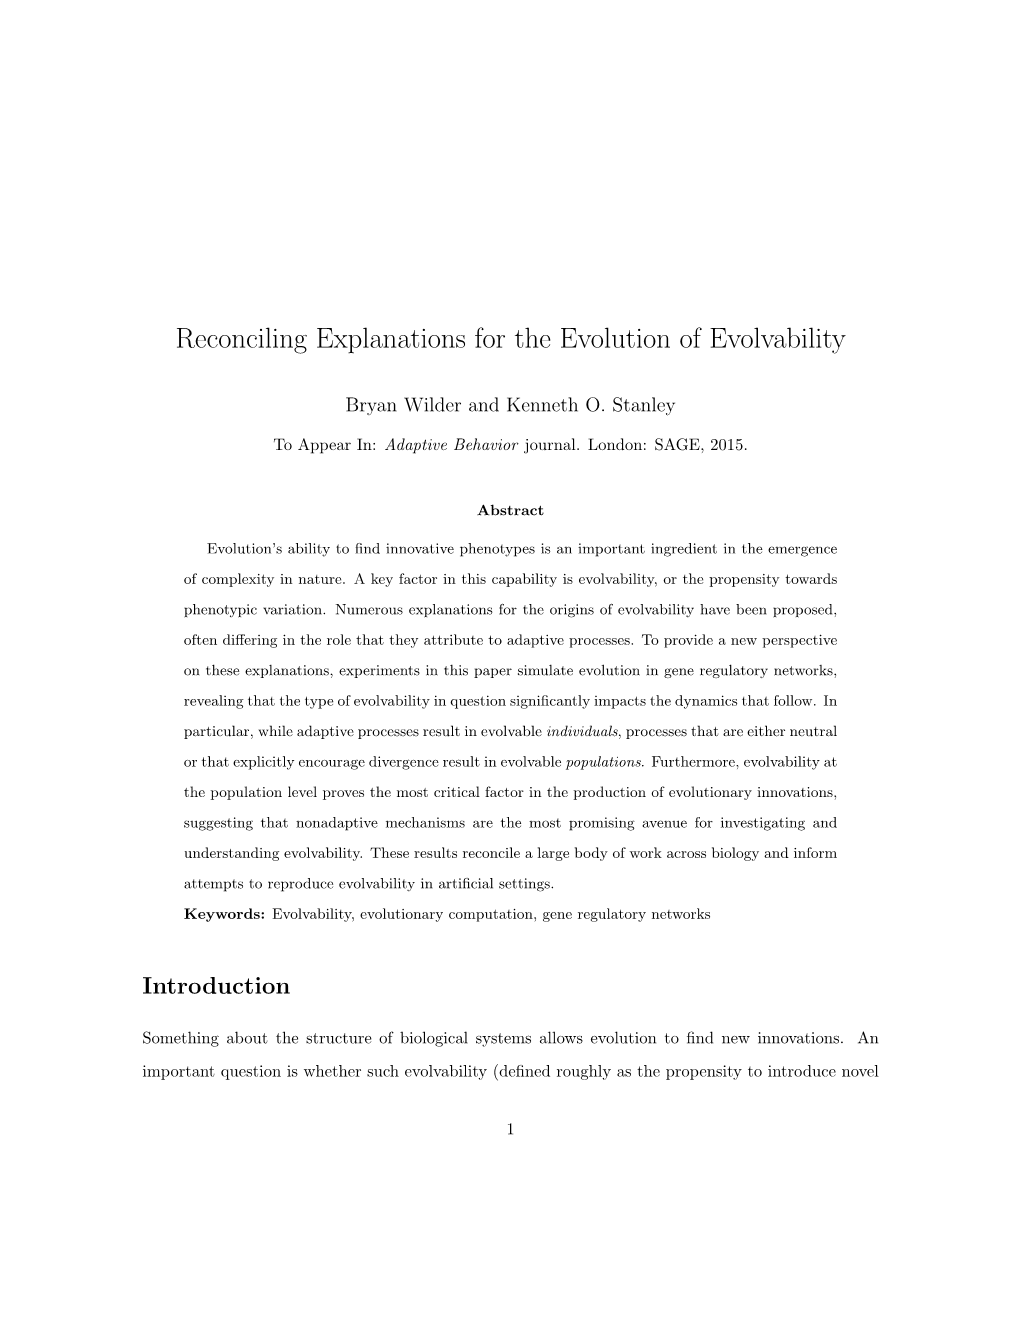 Reconciling Explanations for the Evolution of Evolvability